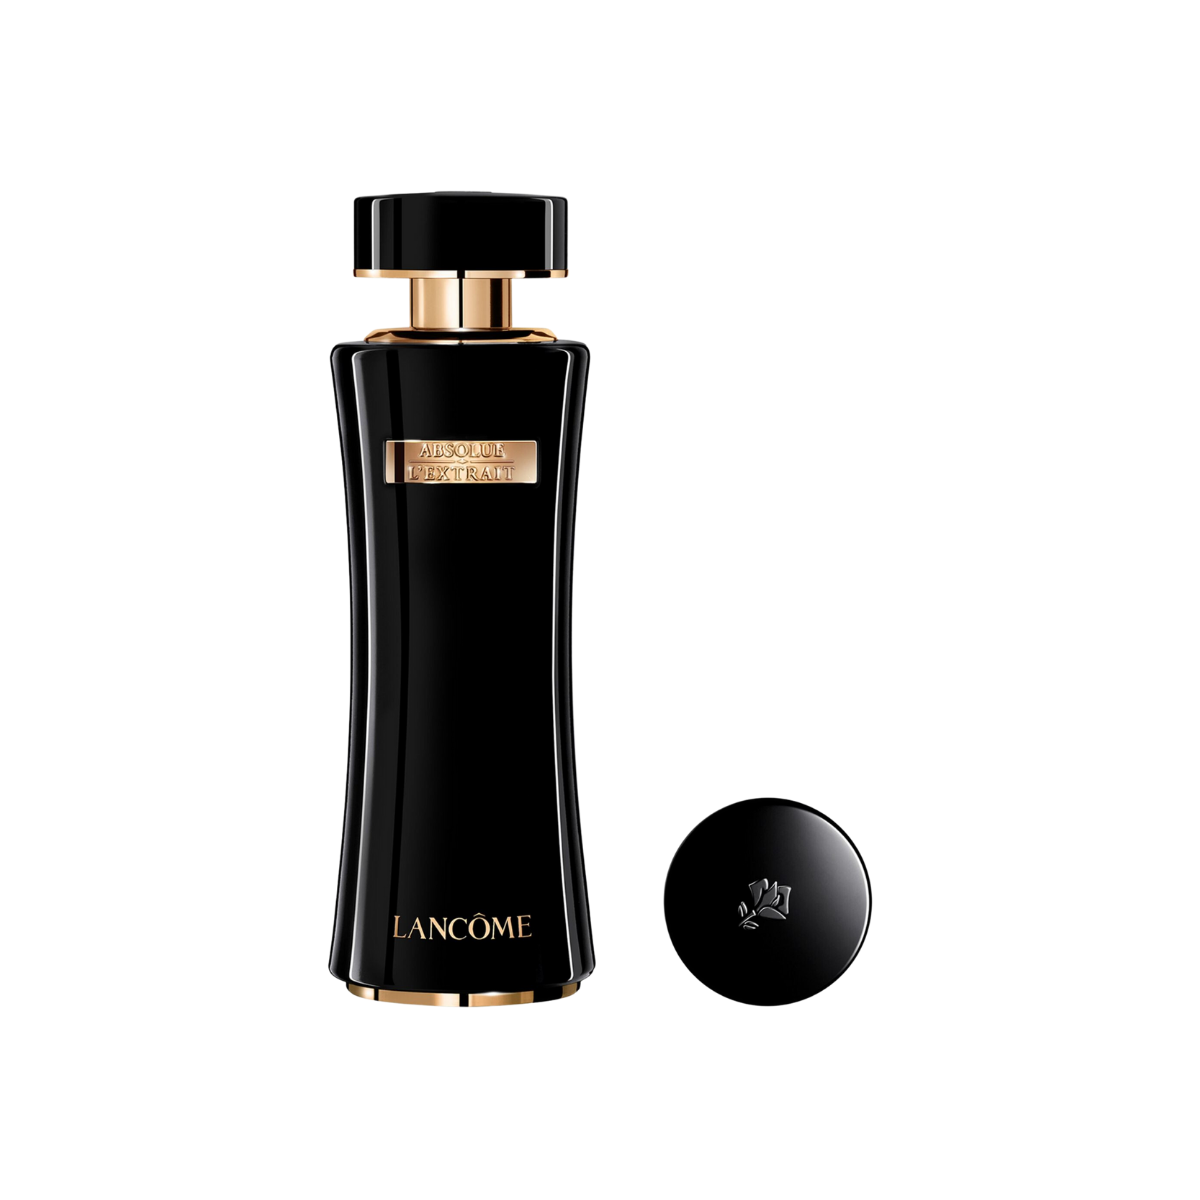 Lancome ABSOLUE L’EXTRAIT THE LOTION 150ml 